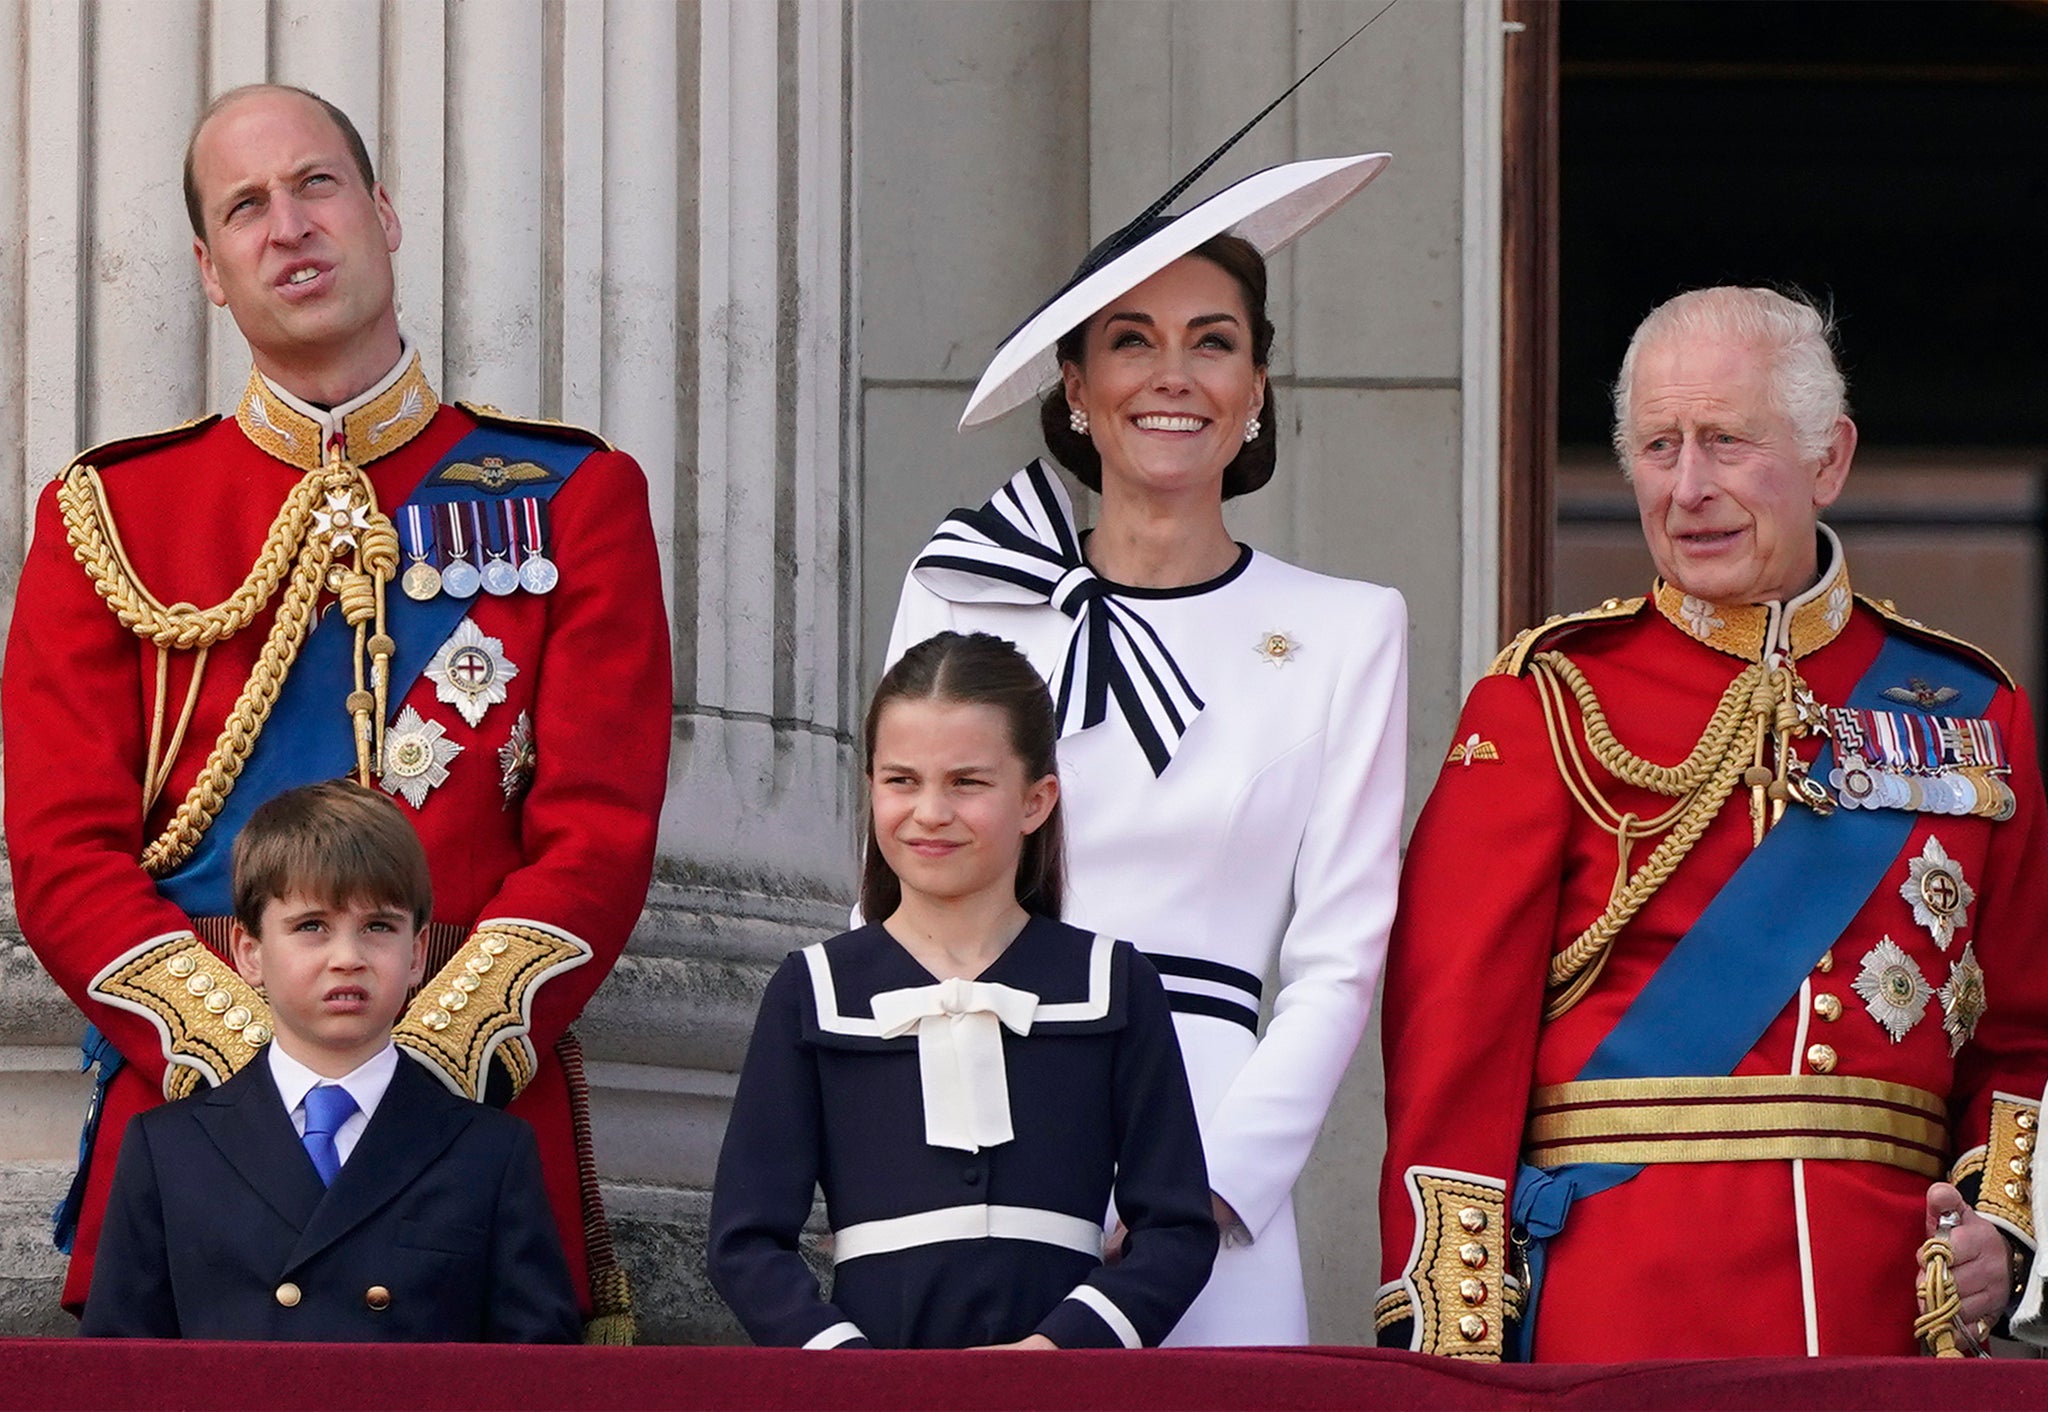 Prince William with his wife and father during Trooping the Color yesterday